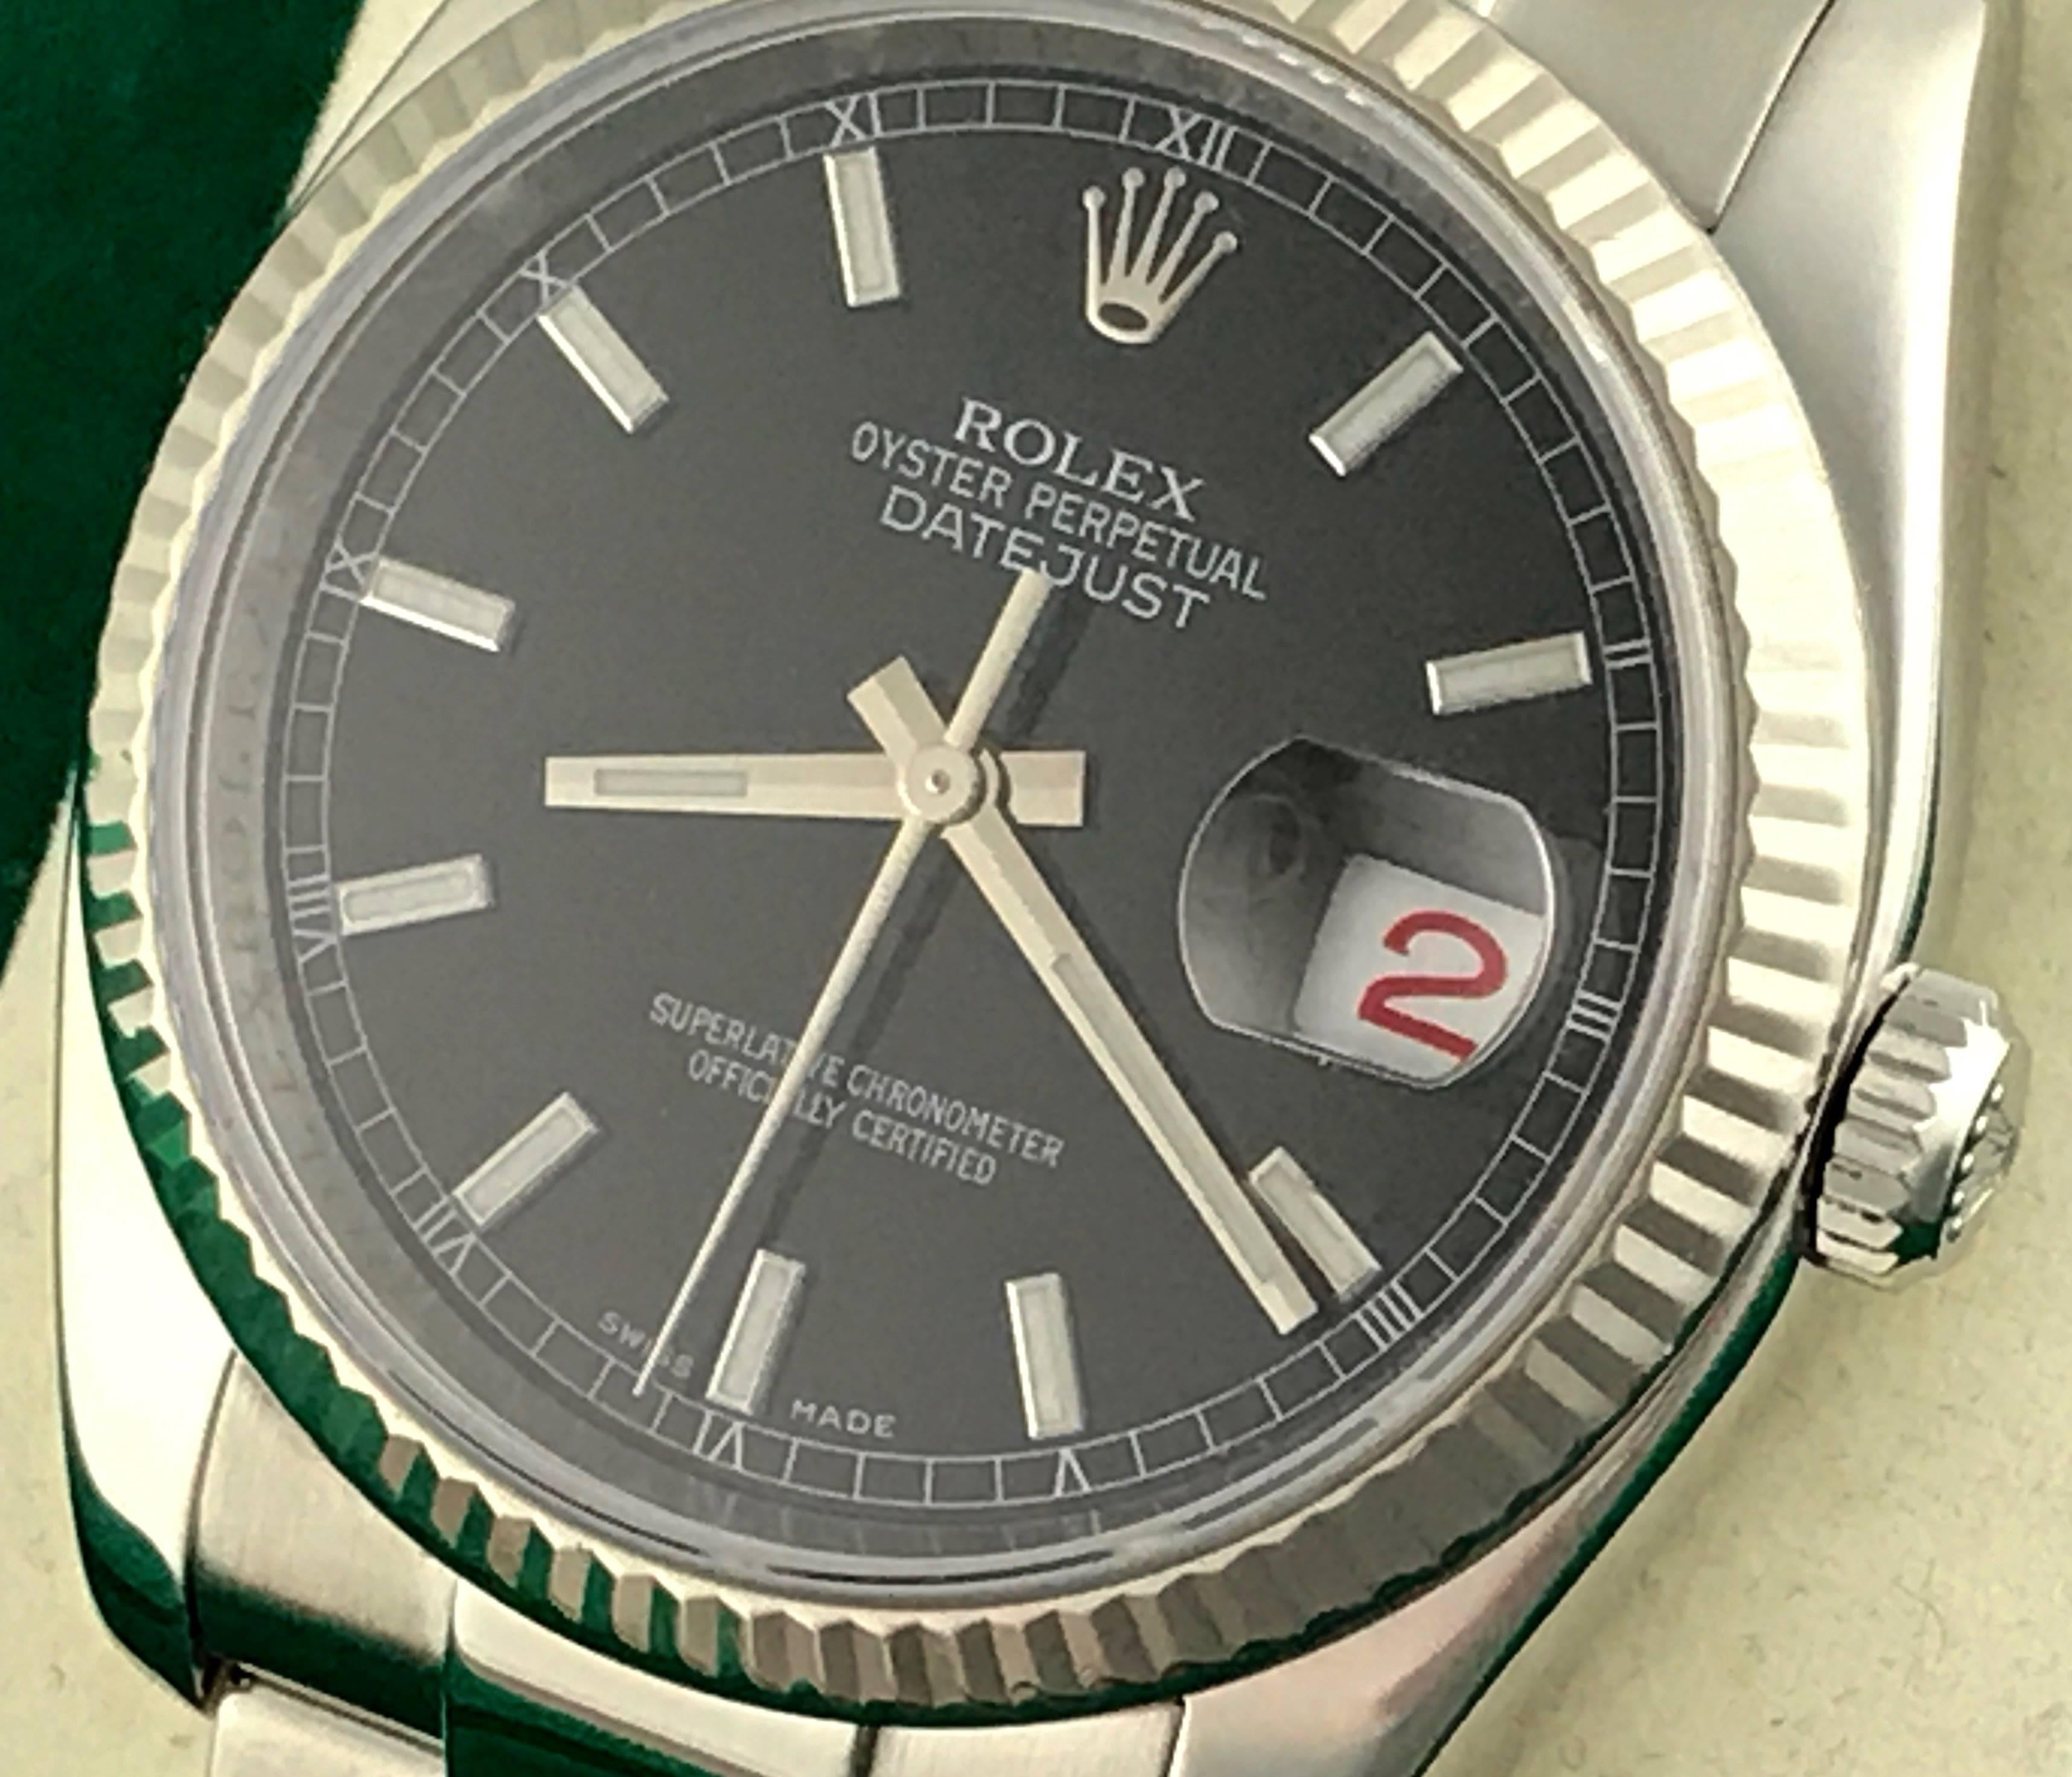 Mens Rolex Datejust Model 116234 Stainless Steel Automatic Wrist Watch. Certified pre-owned and ready to ship.  Stainless Steel case with 18k white gold fluted bezel, 36mm diameter.  Stainless Steel oyster bracelet. Black dial with luminous hour